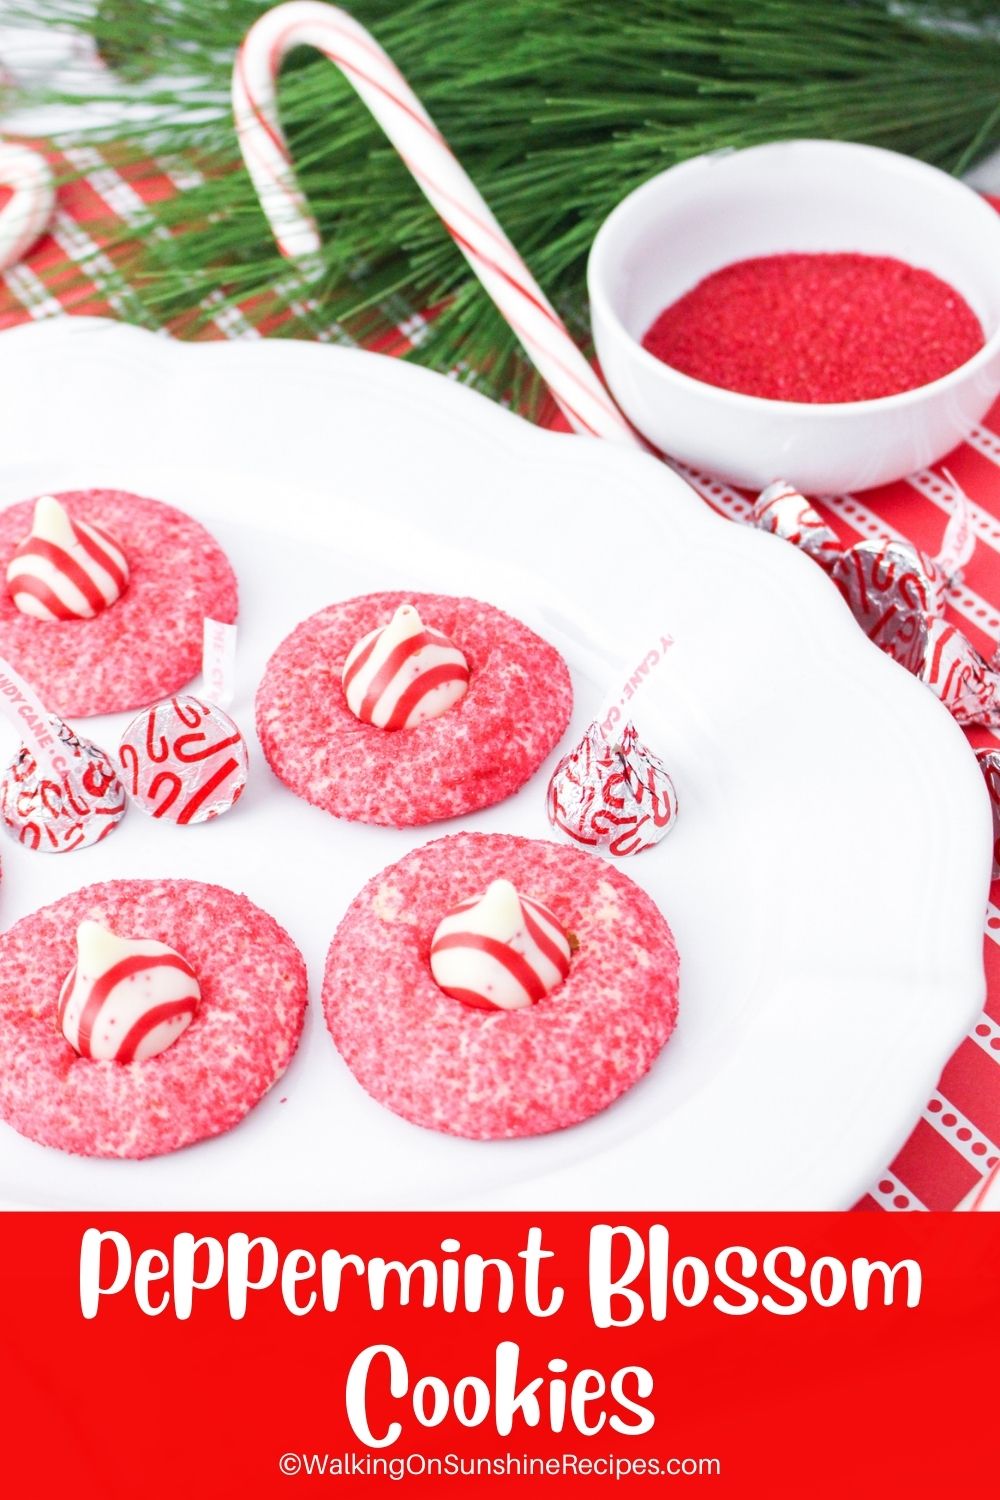 Peppermint blossom cookies in red sugar. 